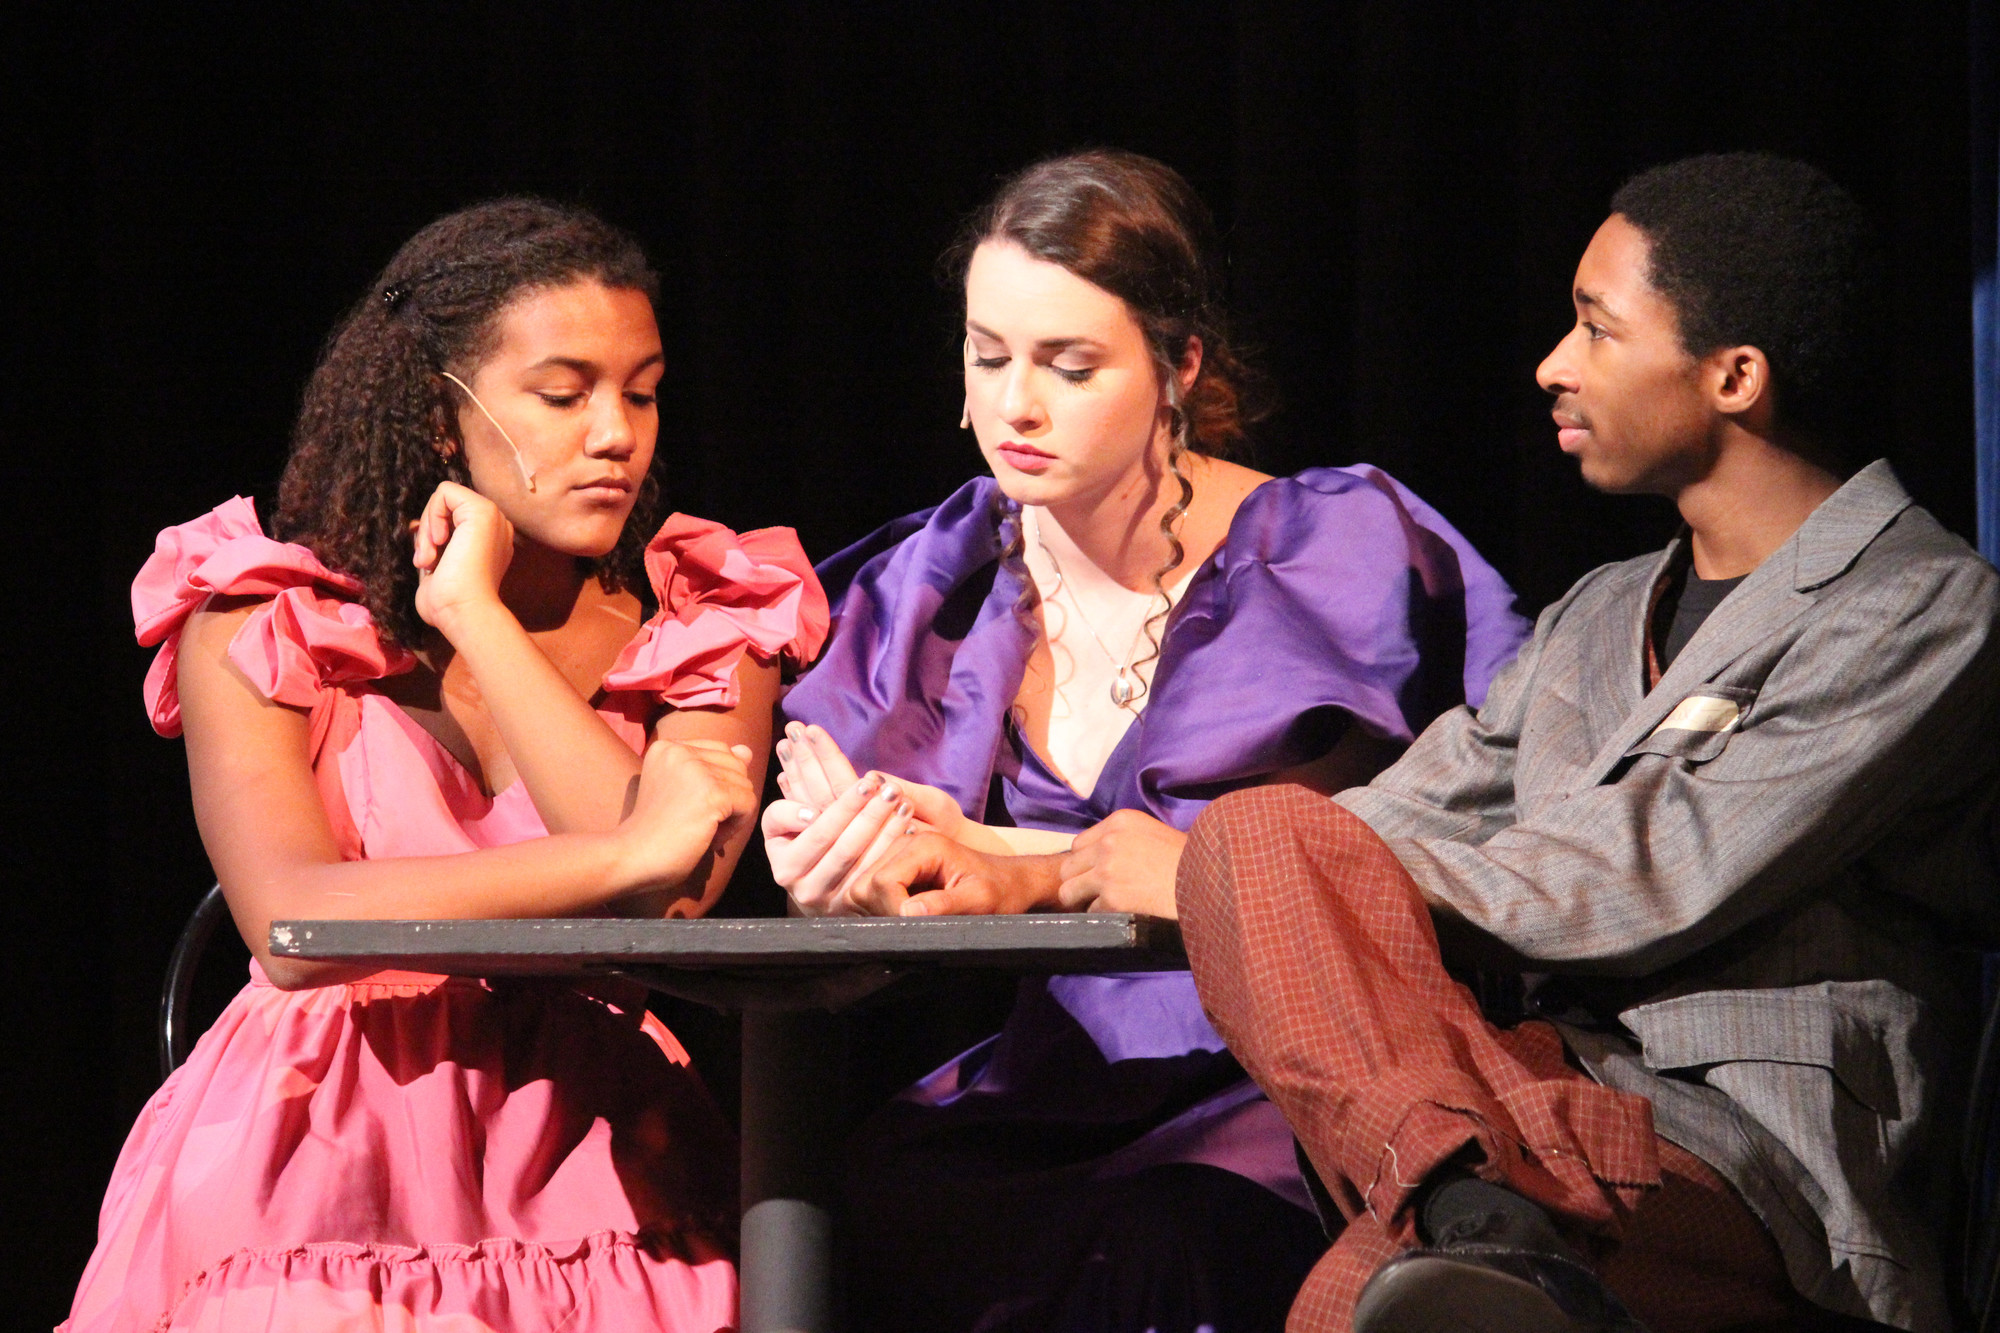 Sophomore Daelynn Jorif, left, Junior Audrey Wilson, center, and Senior Malik Somers played Minnie Fay, Irene Molloy, and Cornelius Hackl during this scene of Hello, Dolly!